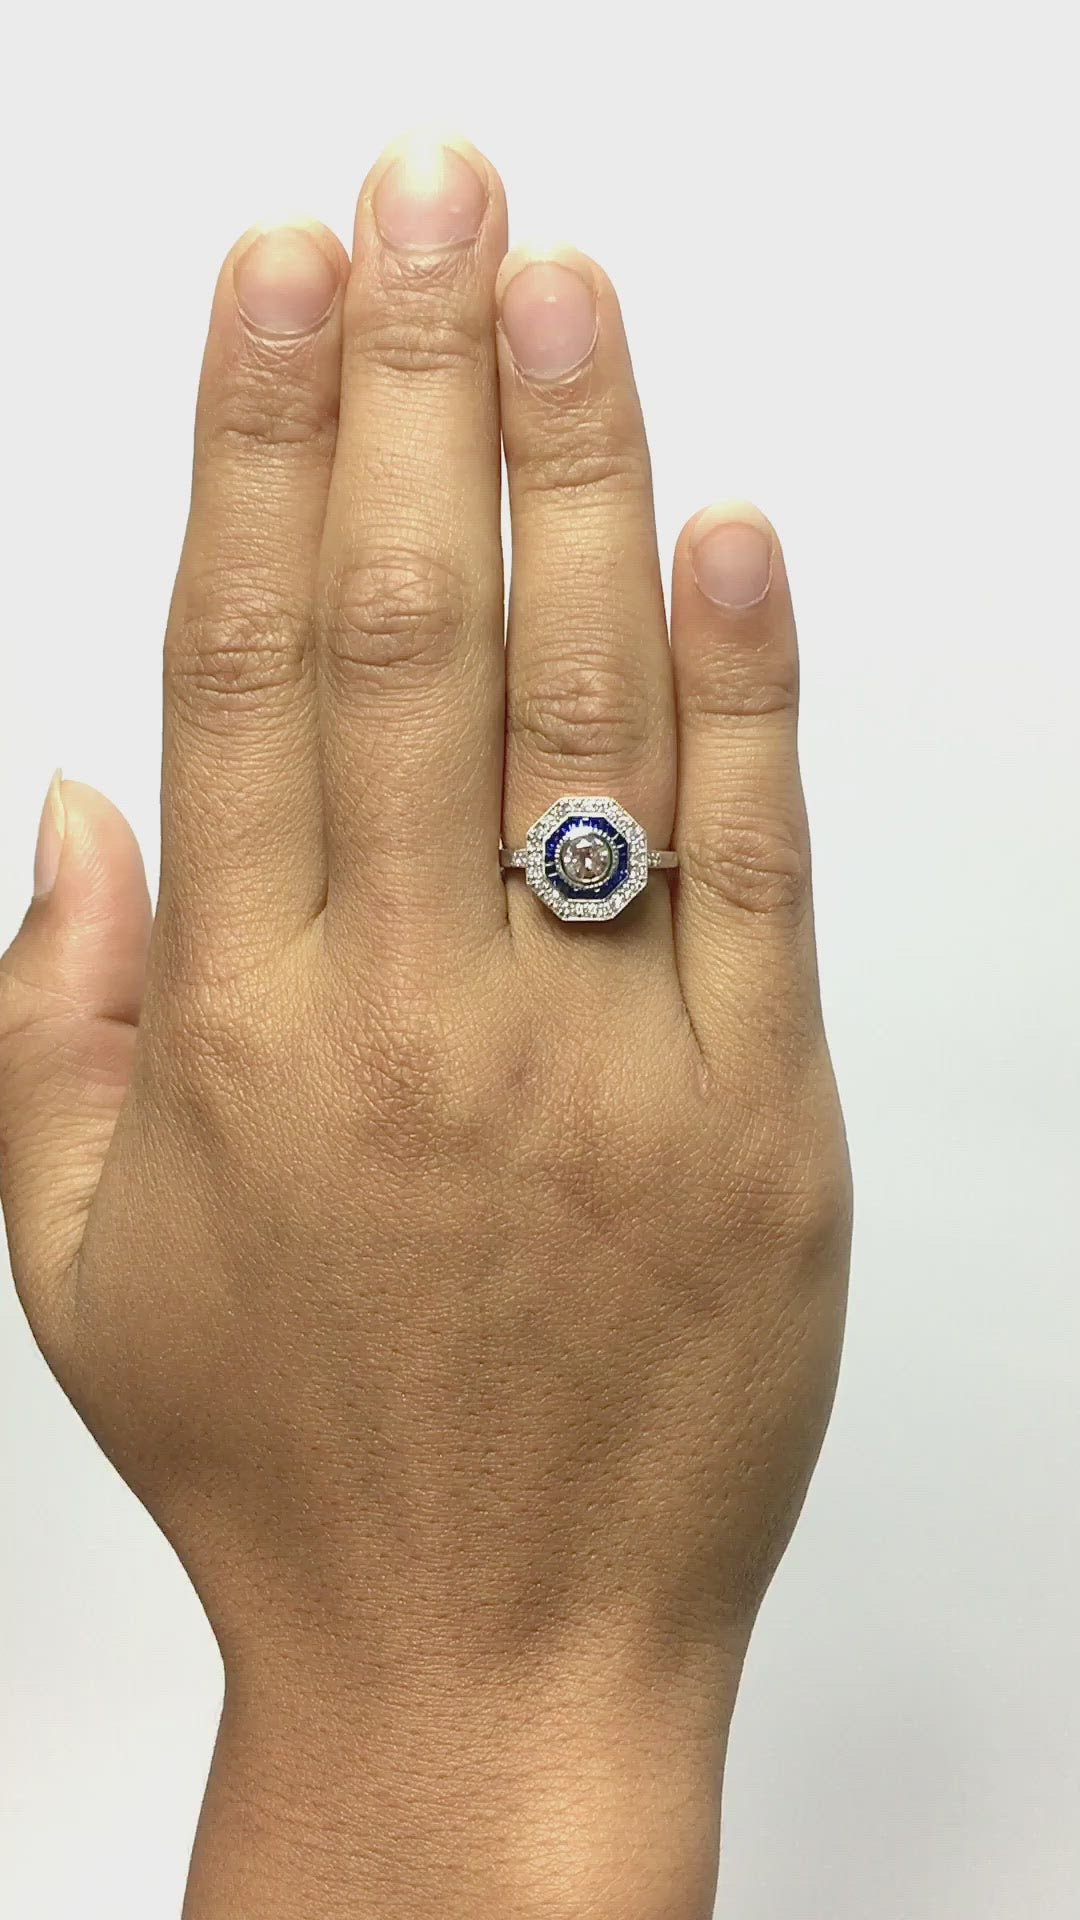 This engagement ring has two halos, with sapphires and diamonds.